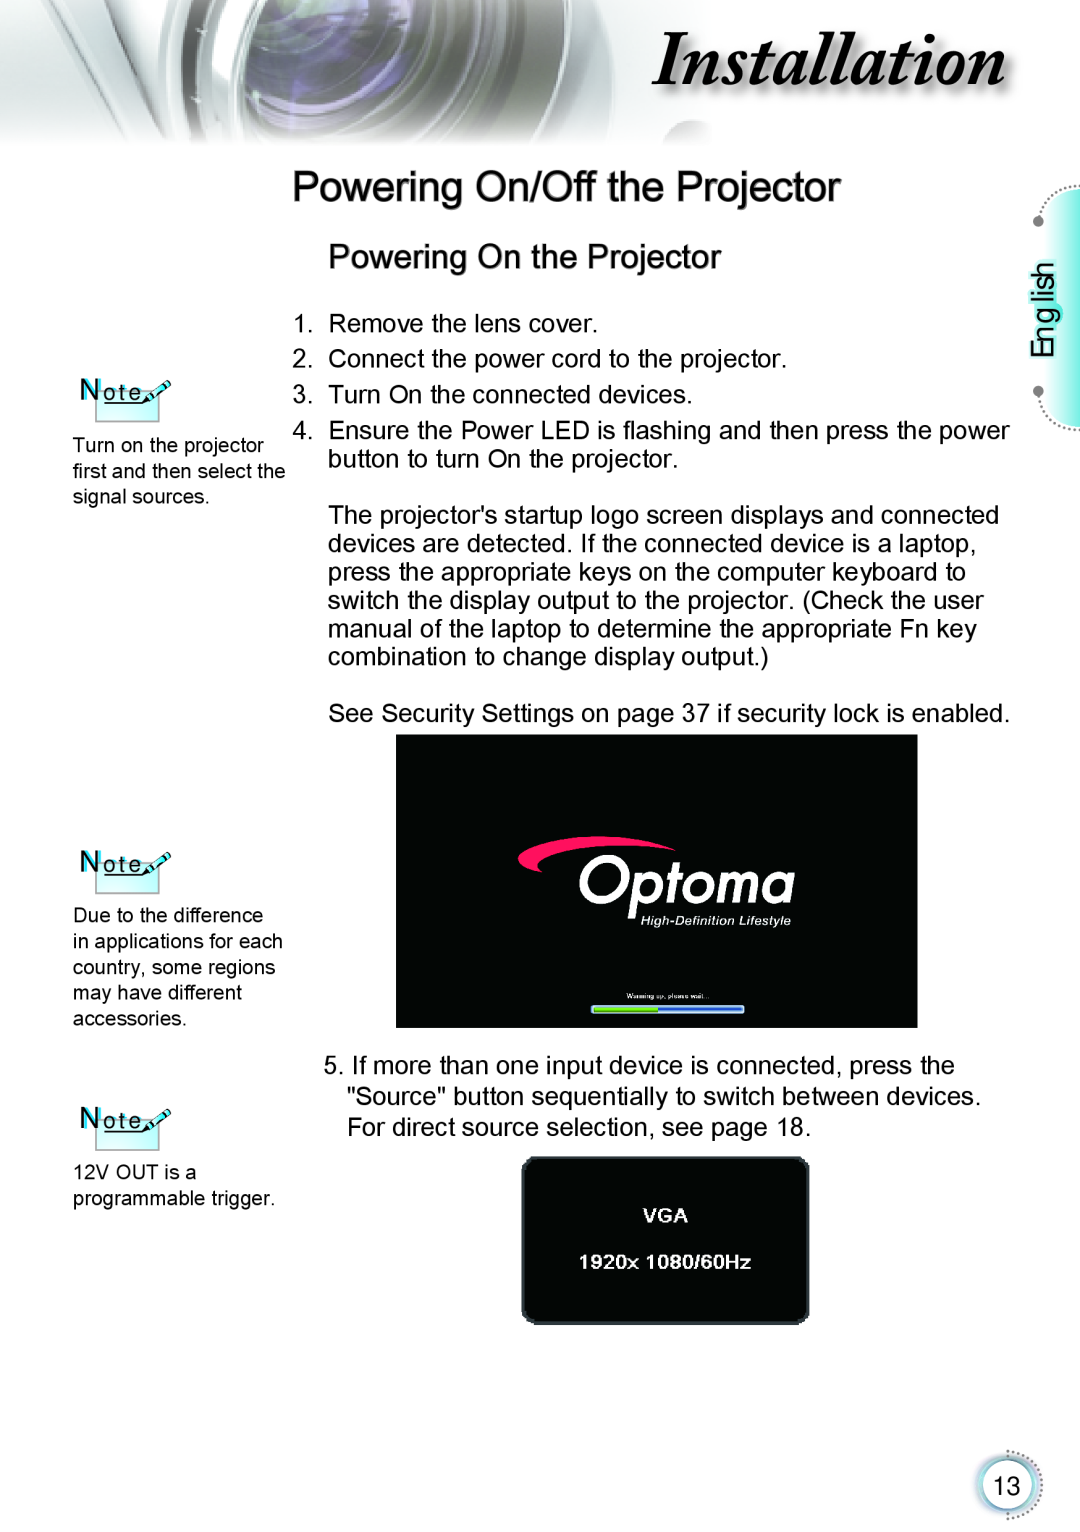 Optoma Technology TH1060P manual Powering On/Off the Projector, Powering On the Projector, Installation, English 